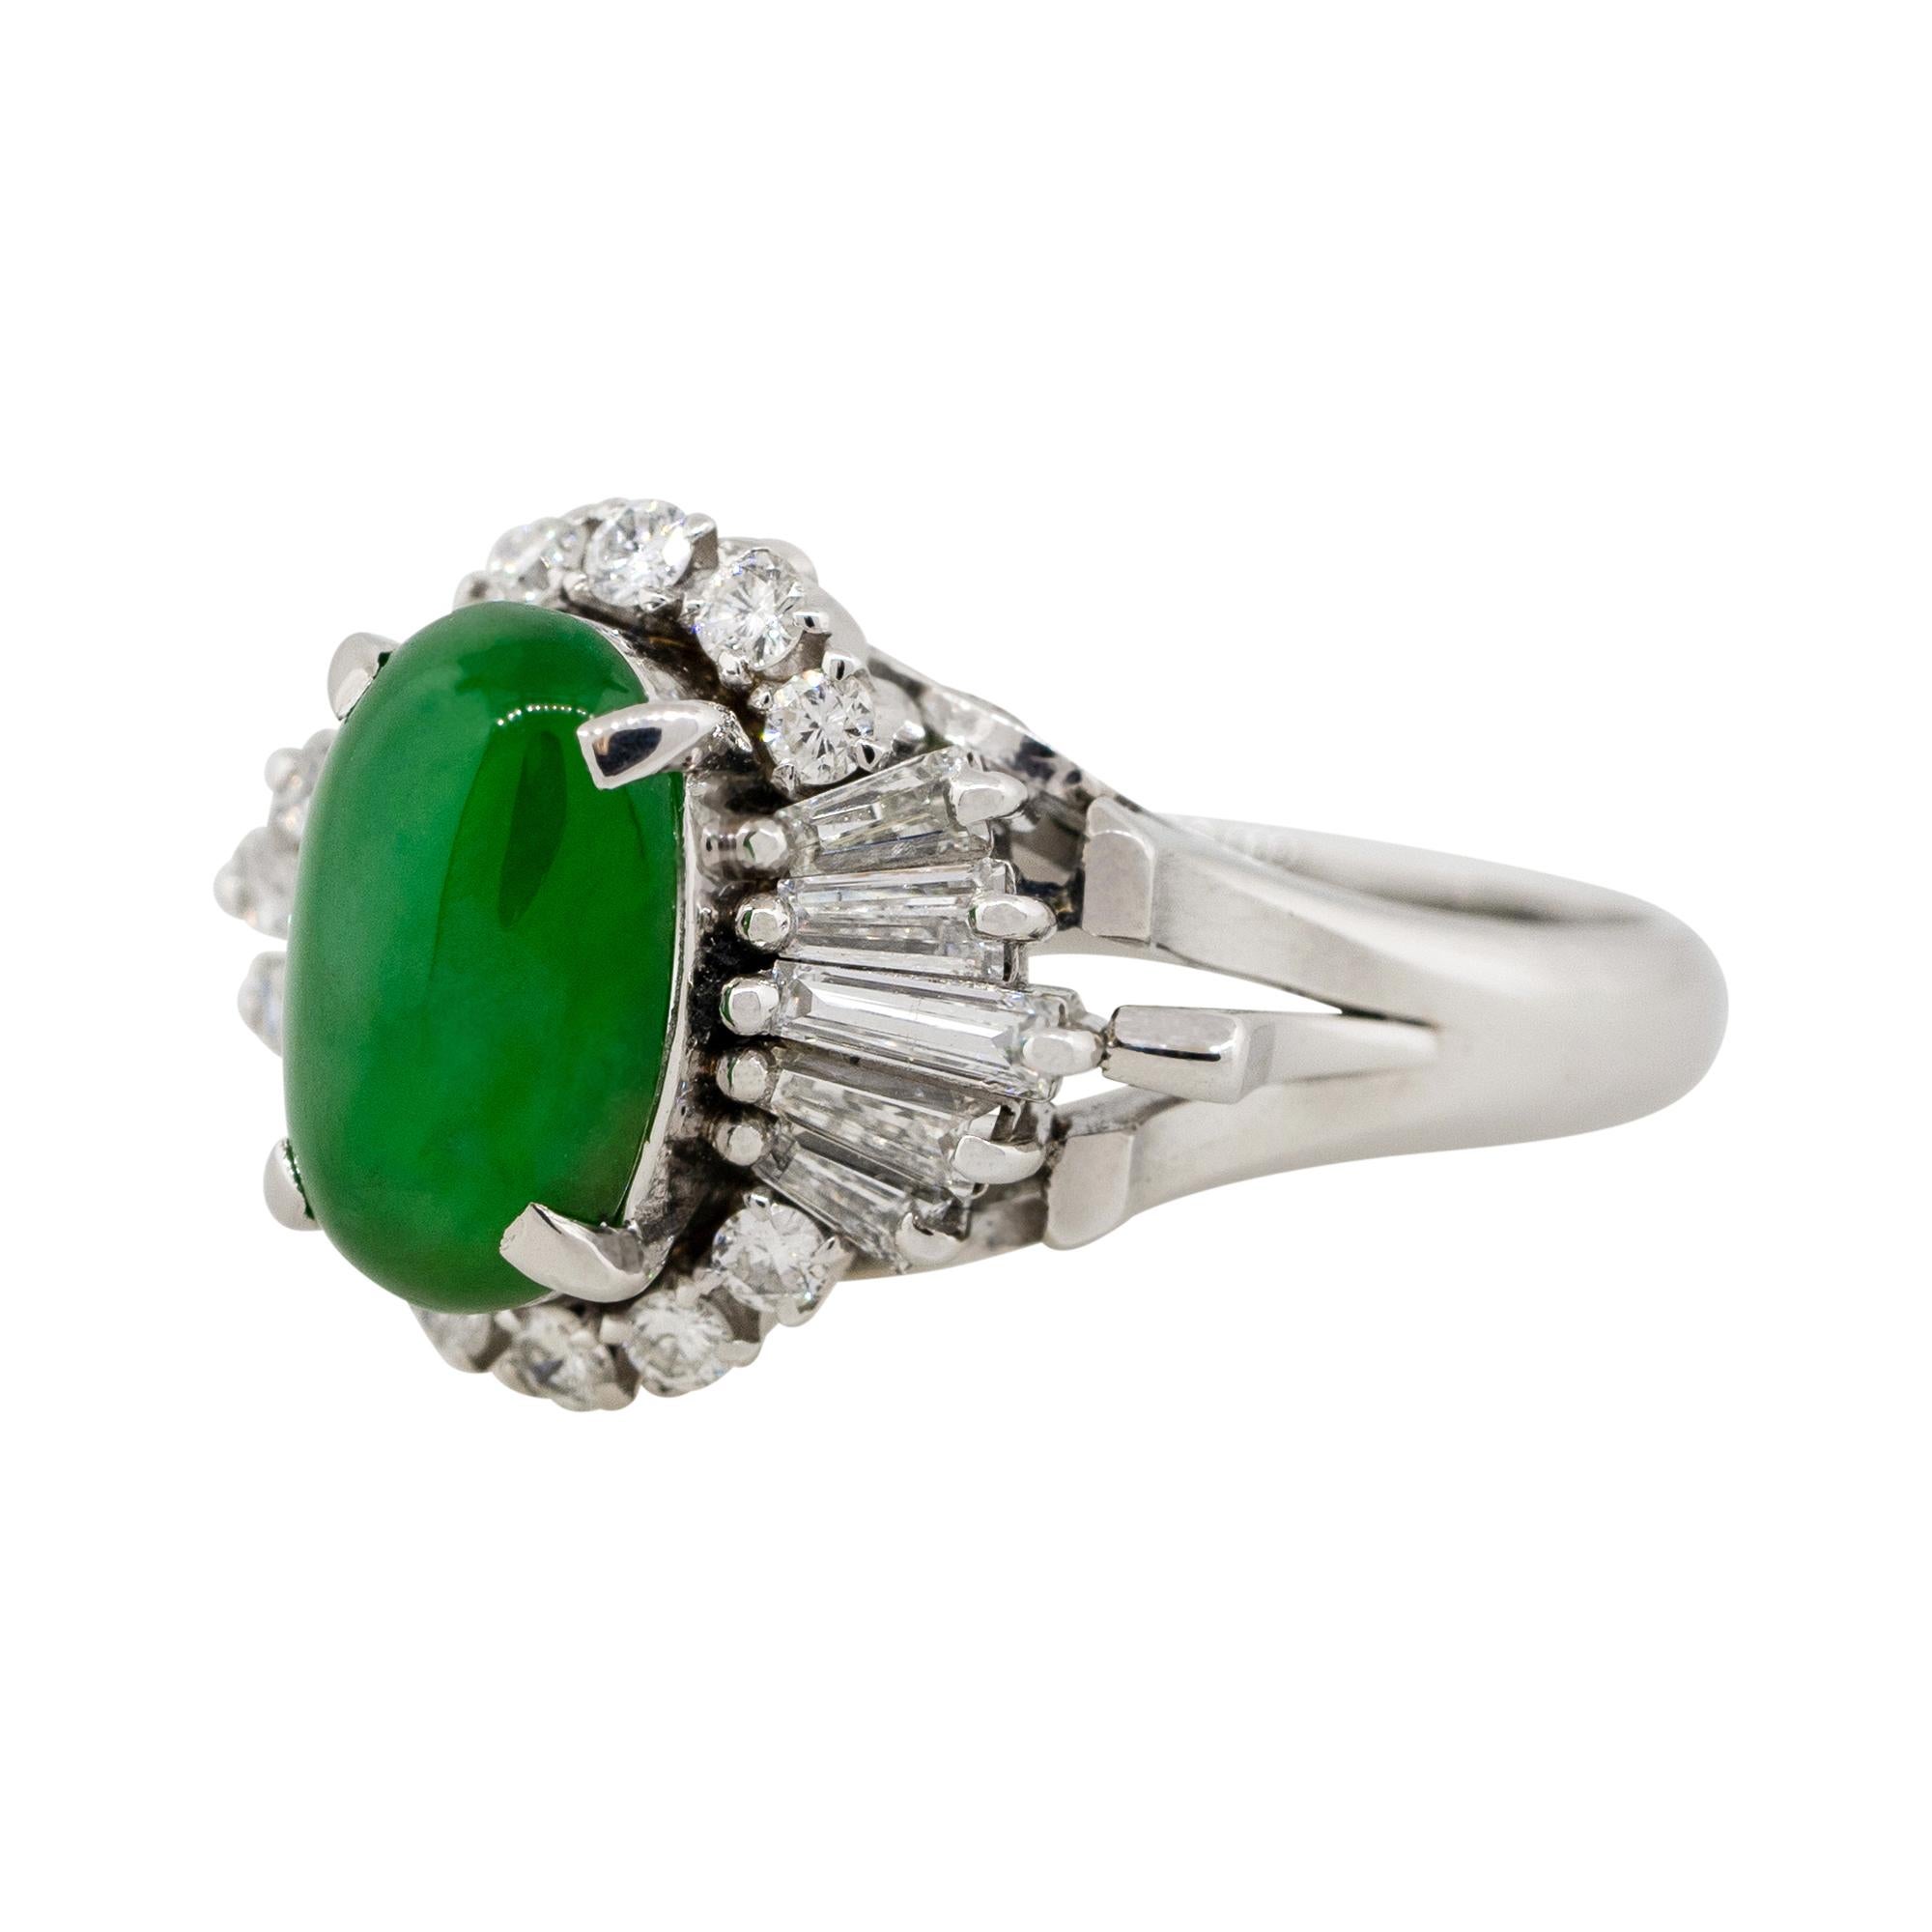 Material: Platinum
Center Gemstone Details: Approx. 2.11ctw Jade cabochon center gemstone
Diamond Details: Approx. 0.70ctw of round & baguette cut Diamonds. Diamonds are G/H in color and VS in clarity
Size: 4.75
Total weight: 8.3g